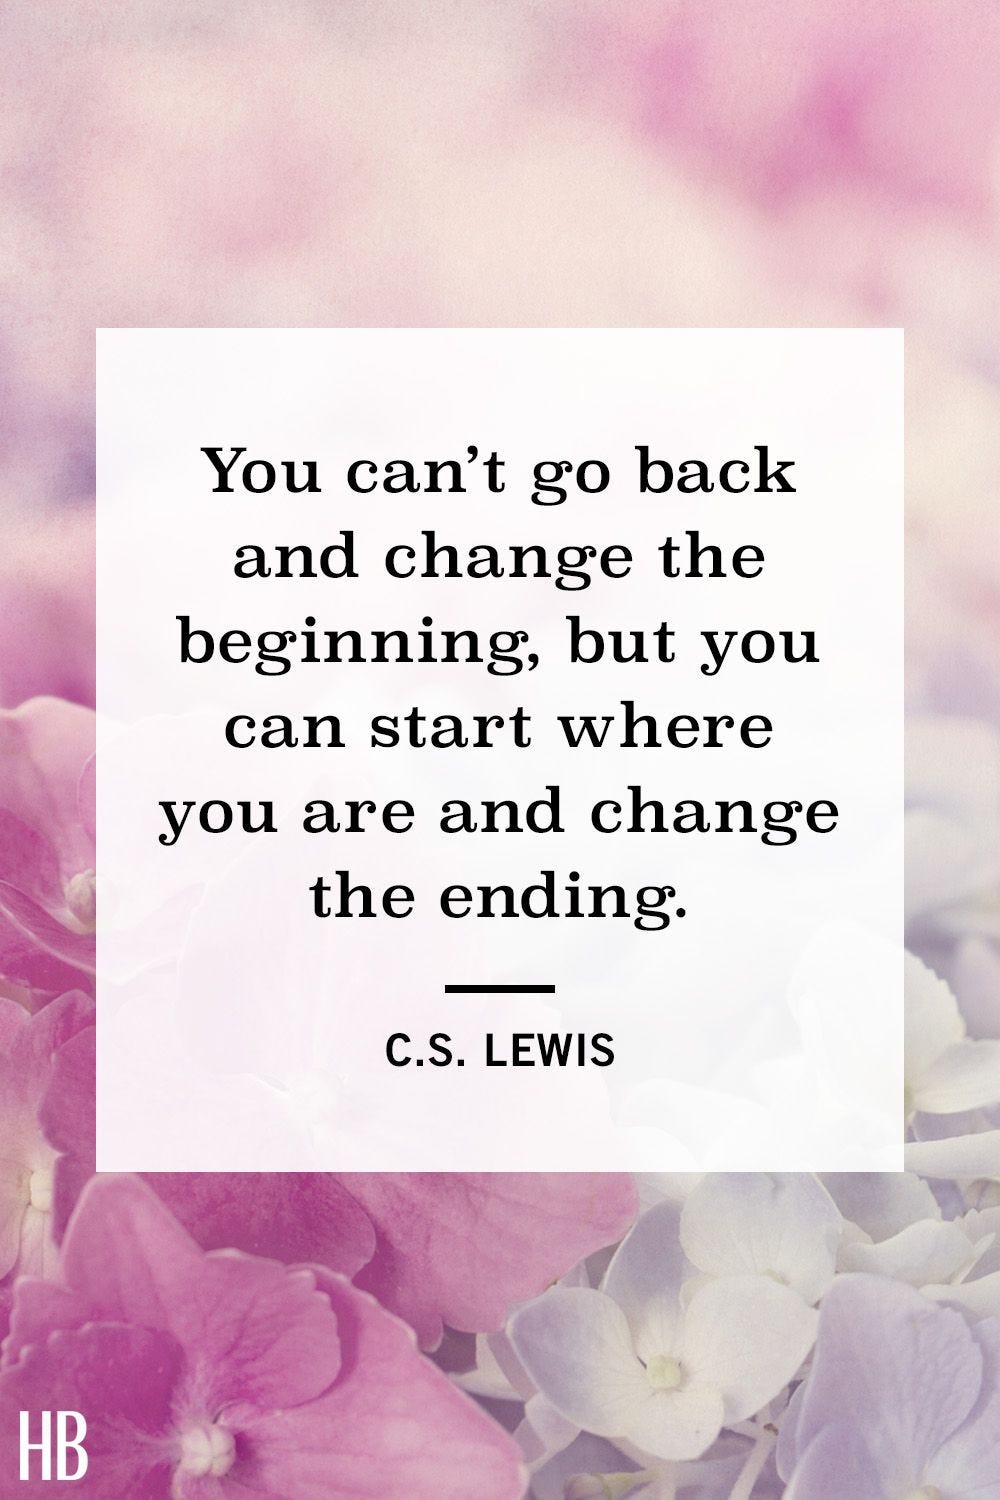 “You can’t go back and change the beginning, but you can start where you are and change the ending” C.S. Lewis